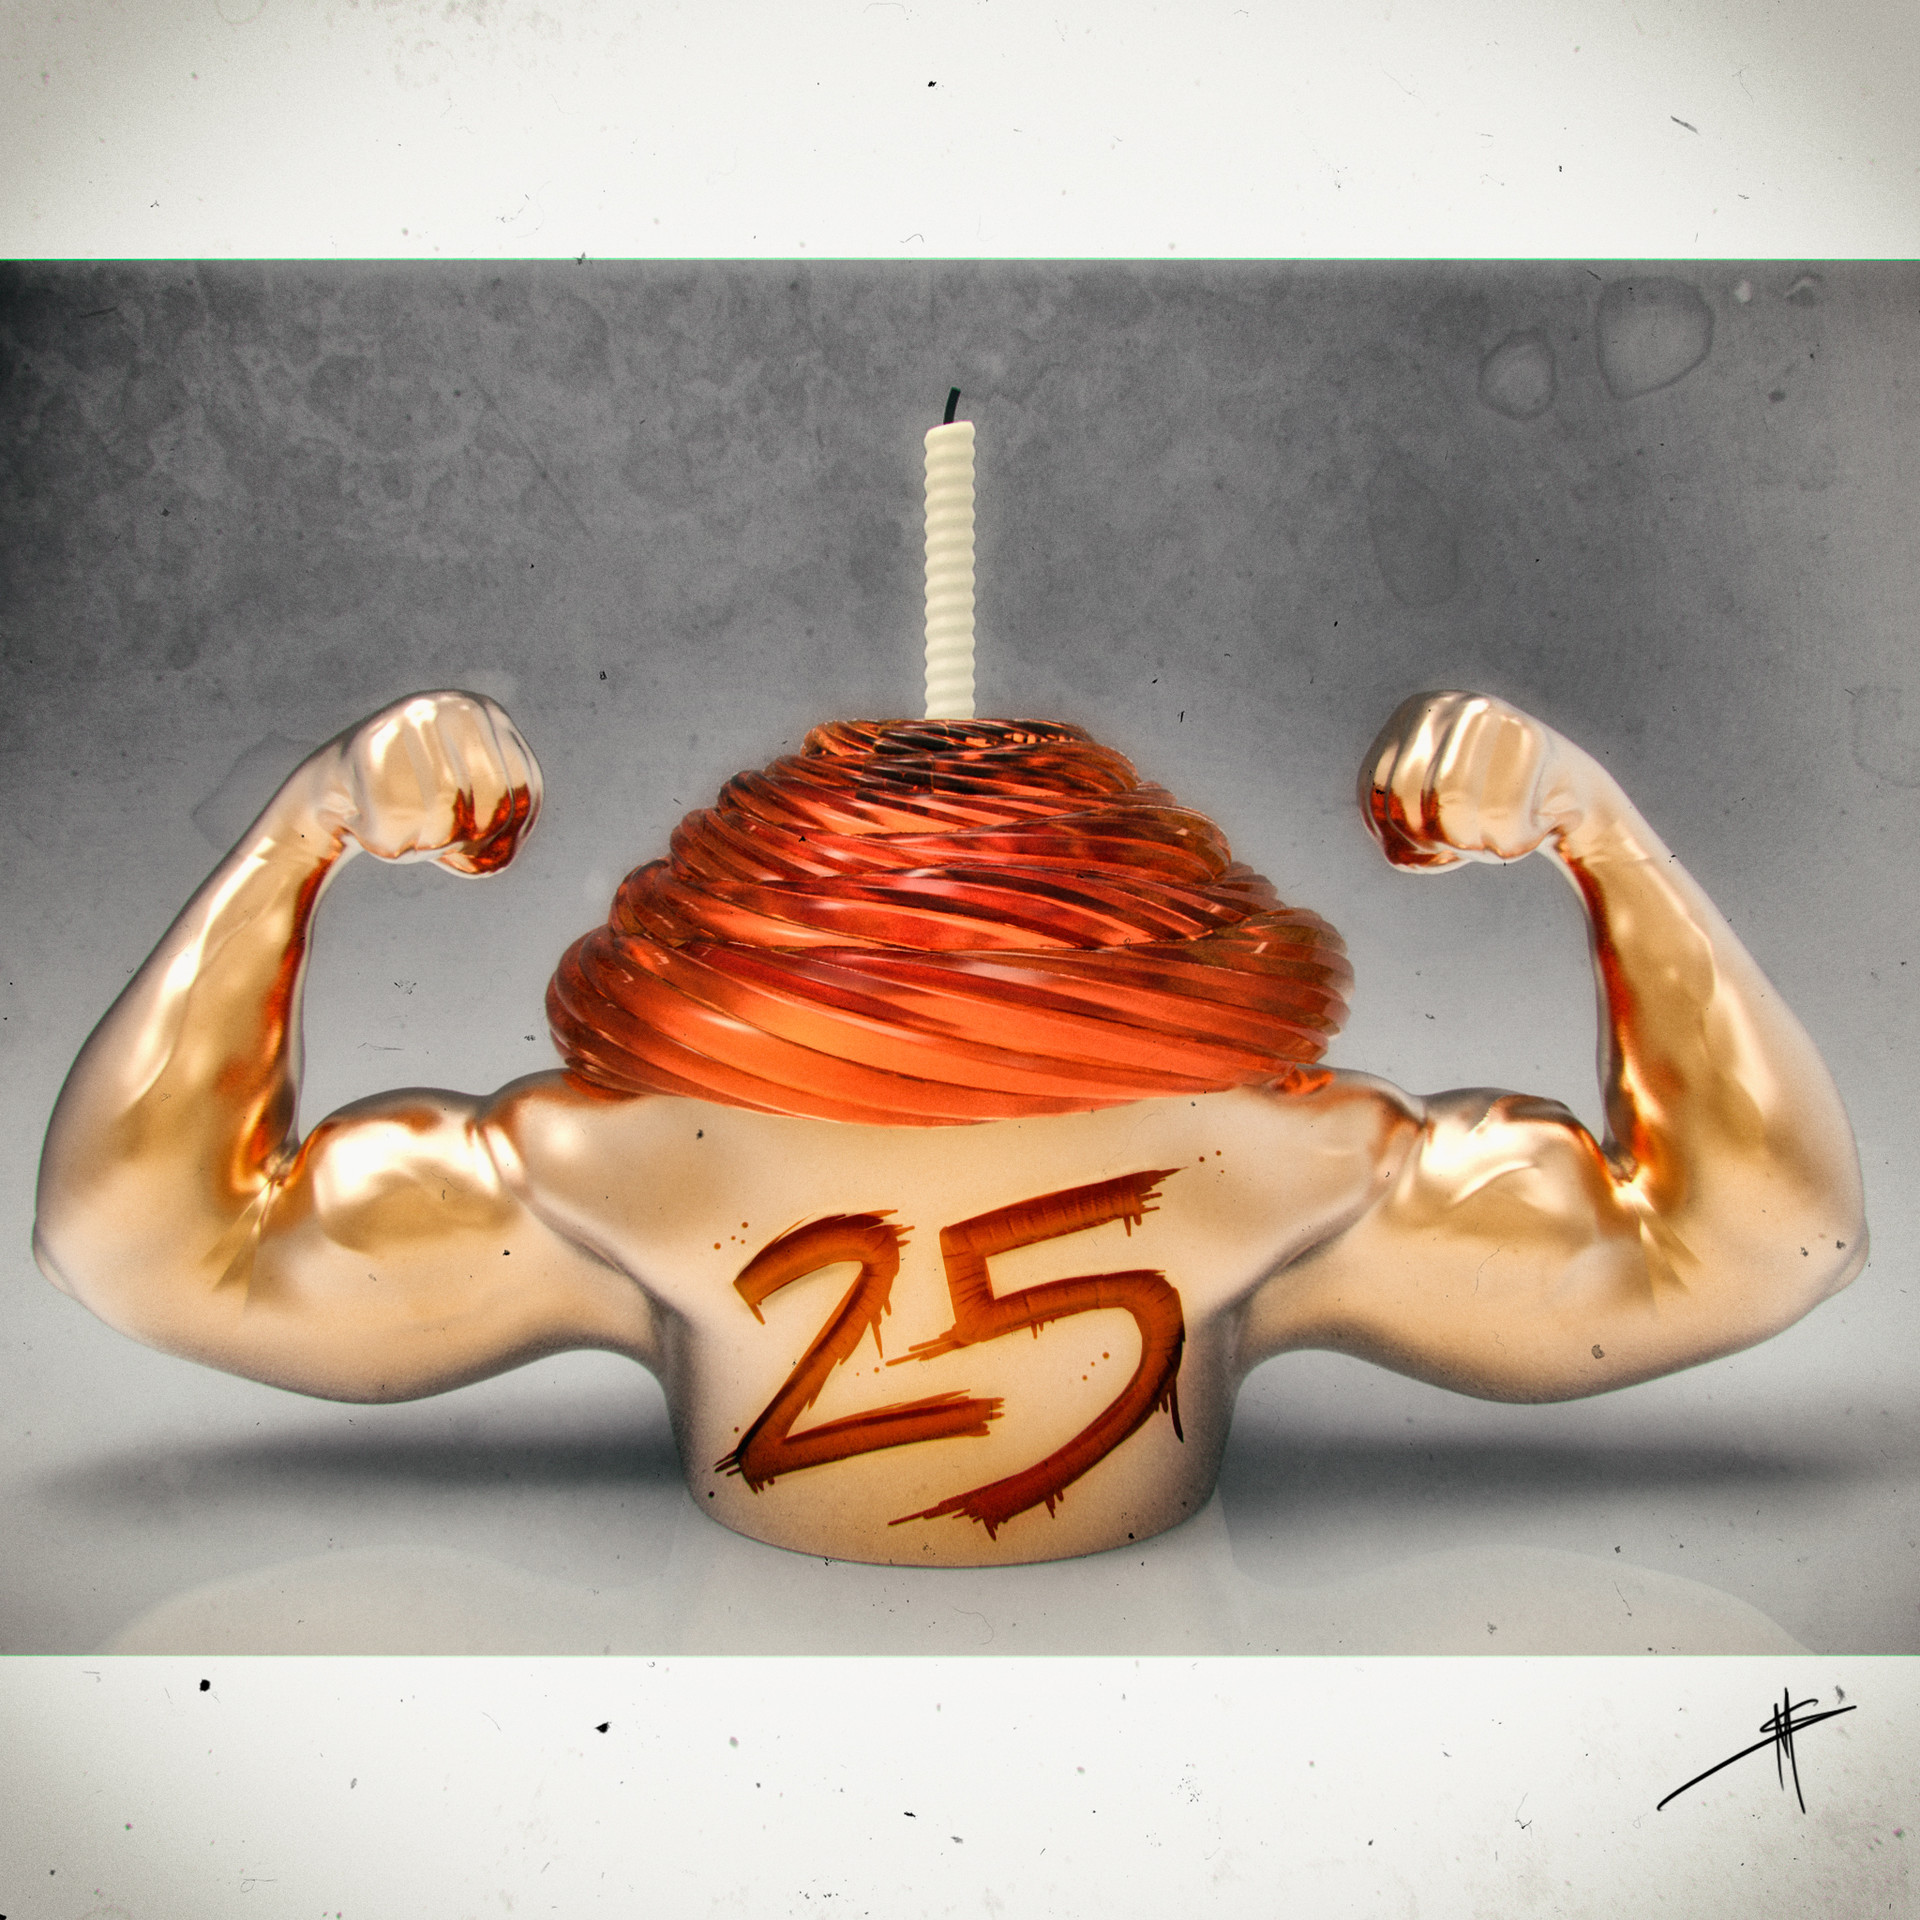 Arm muscle cake for a personal trainer wwwfacebookcomthecupcakers   Crazy cakes Cake 21st cake